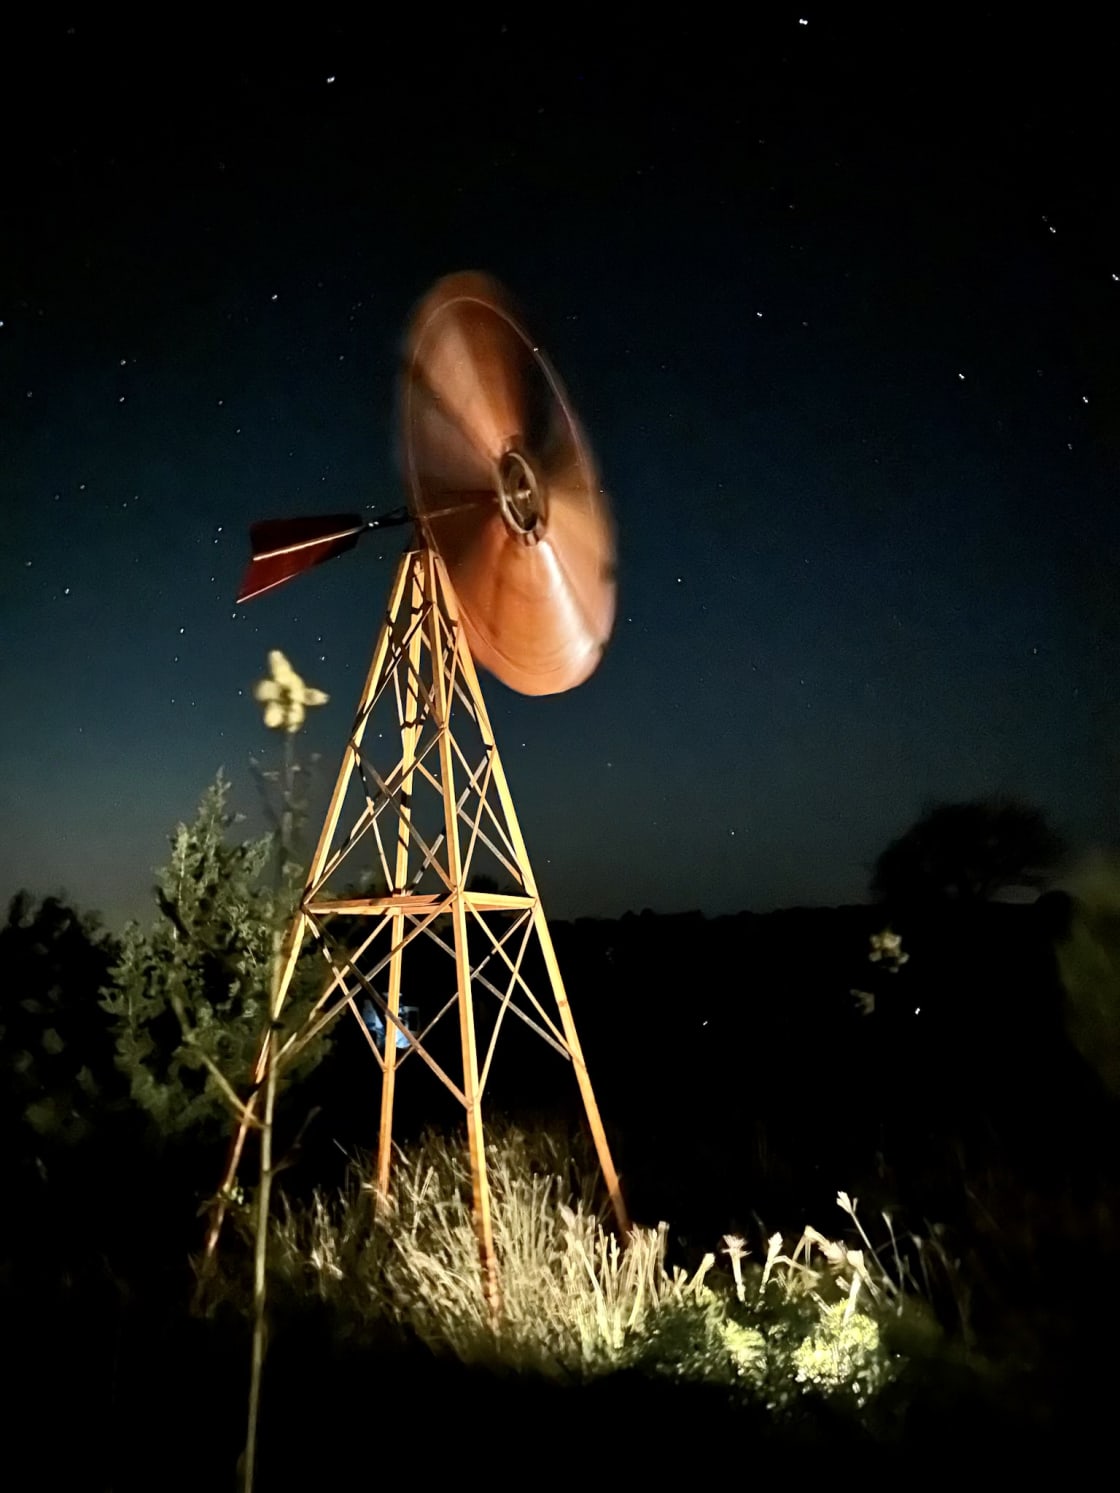 The wind chime and spinning windmill provide serene lullabies for countryside lounging.